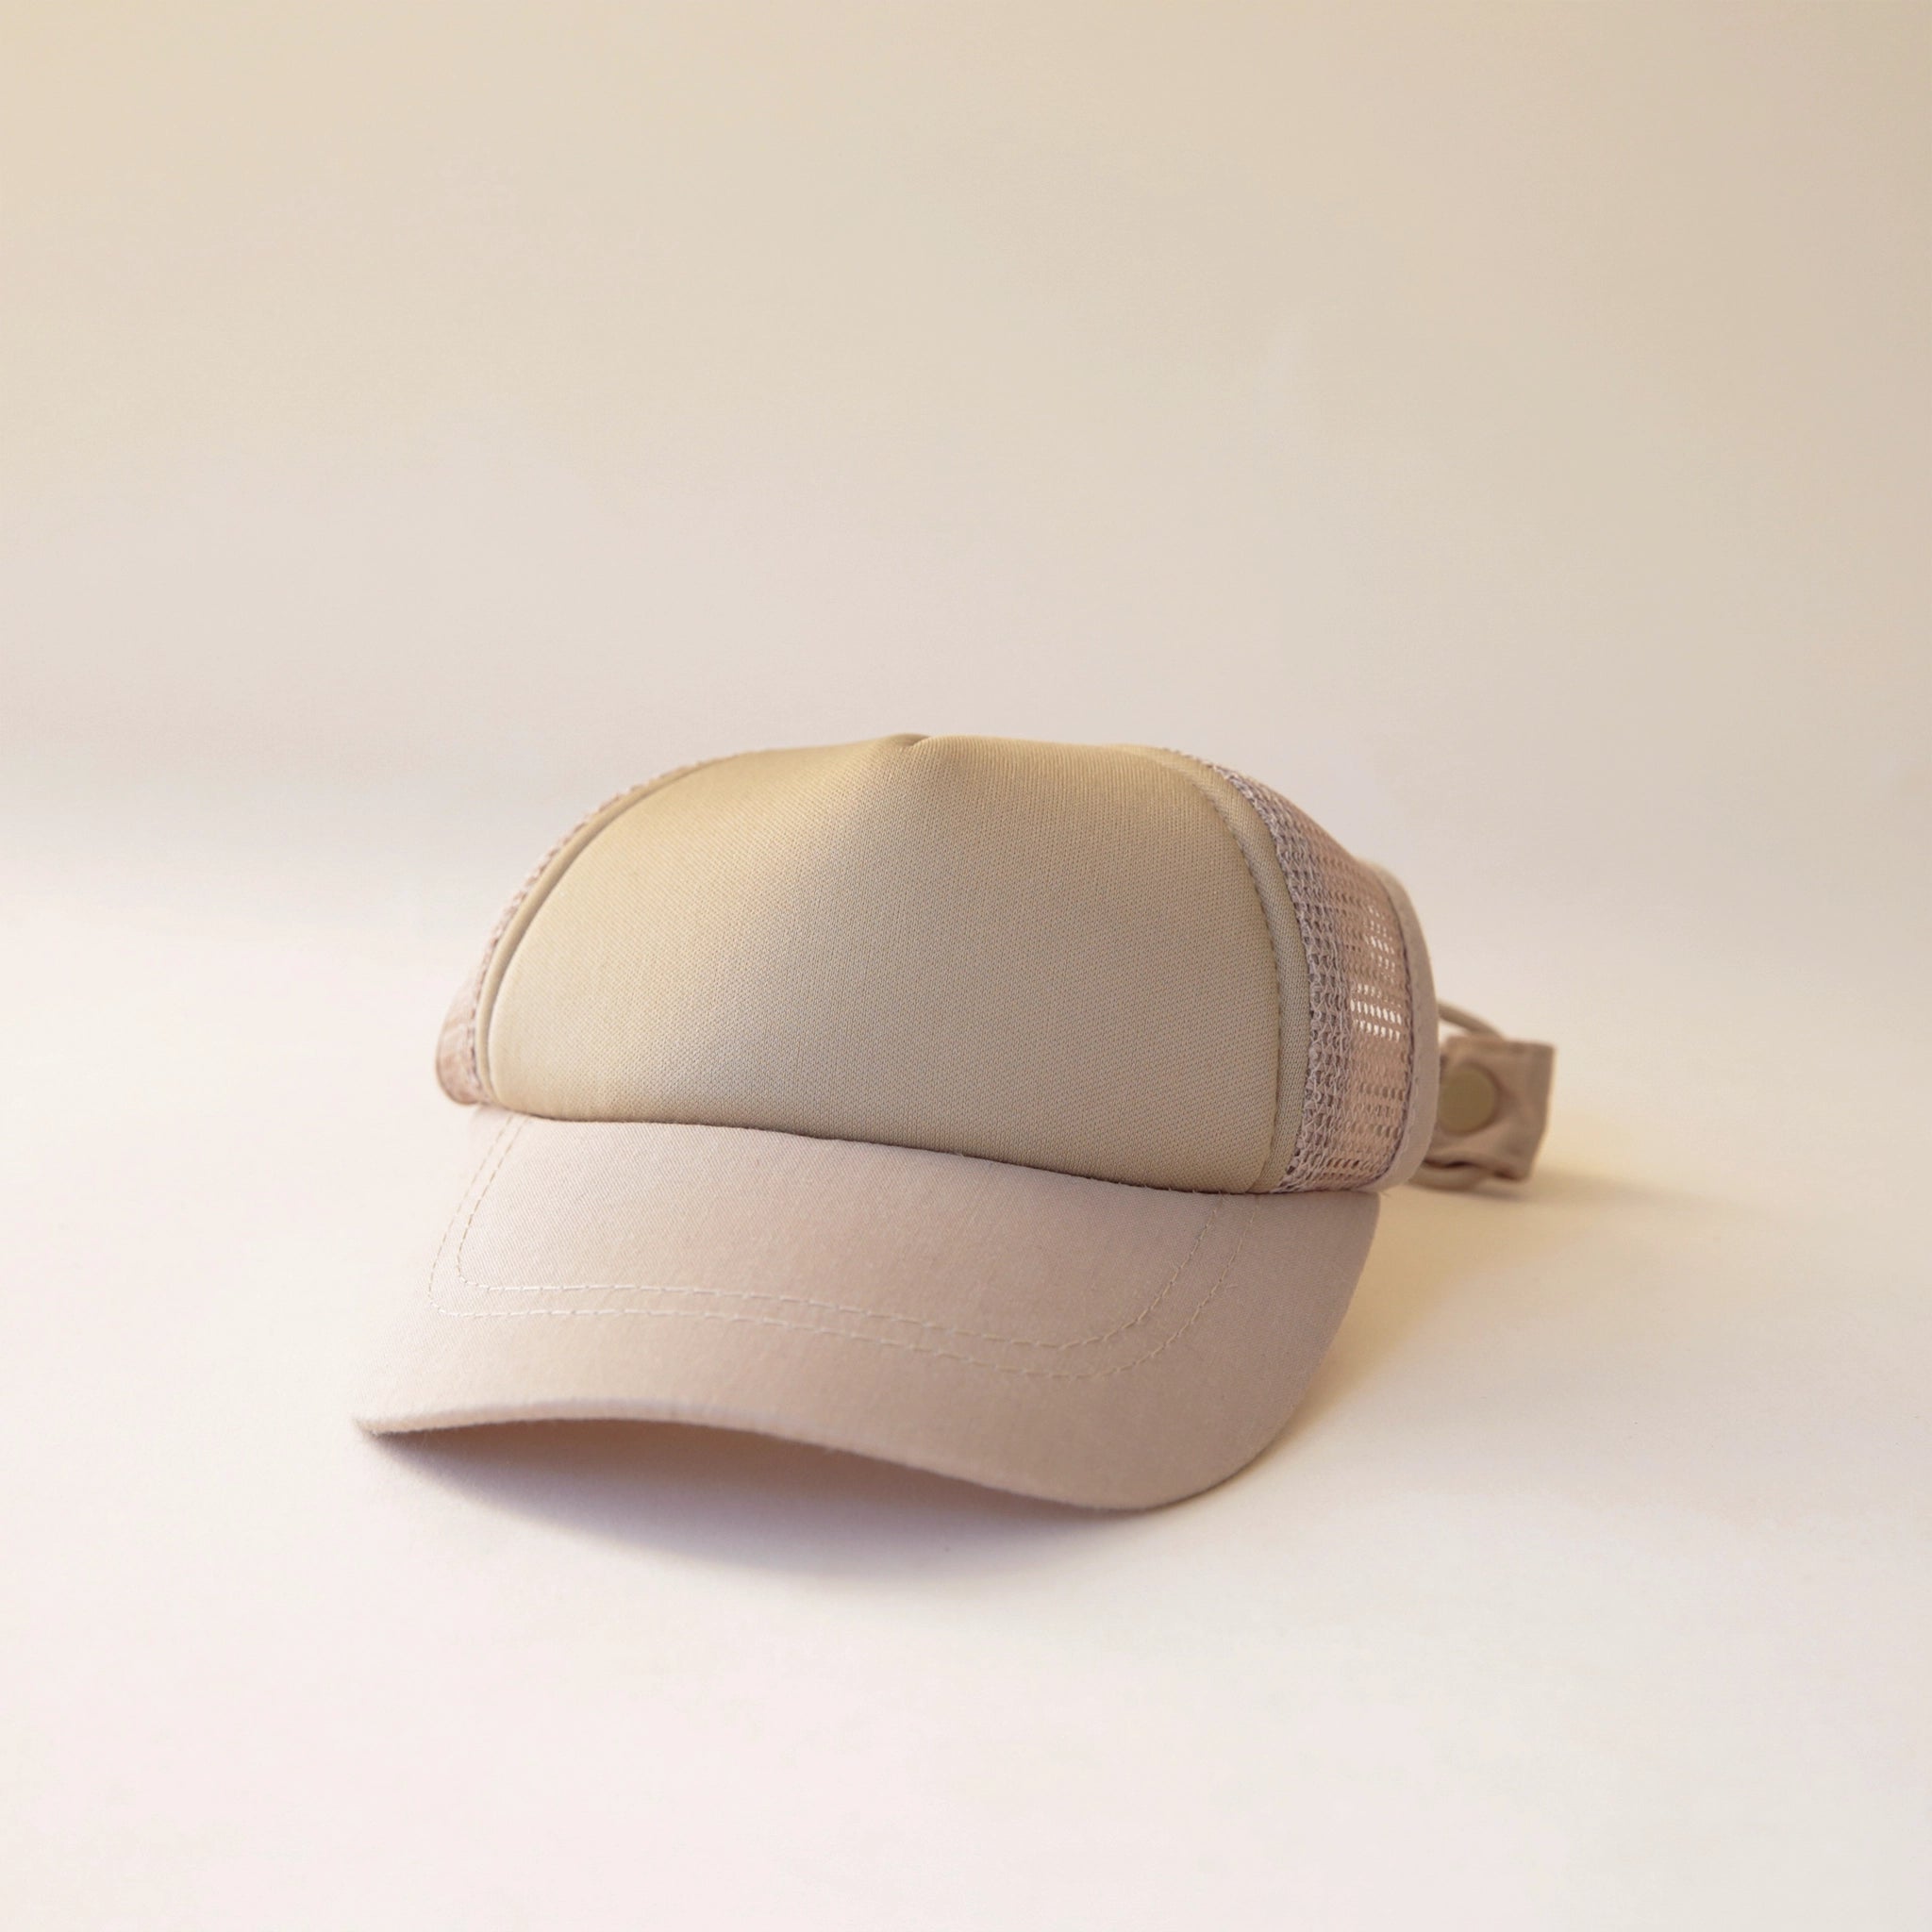 A beige dog baseball hat with a mesh backing.